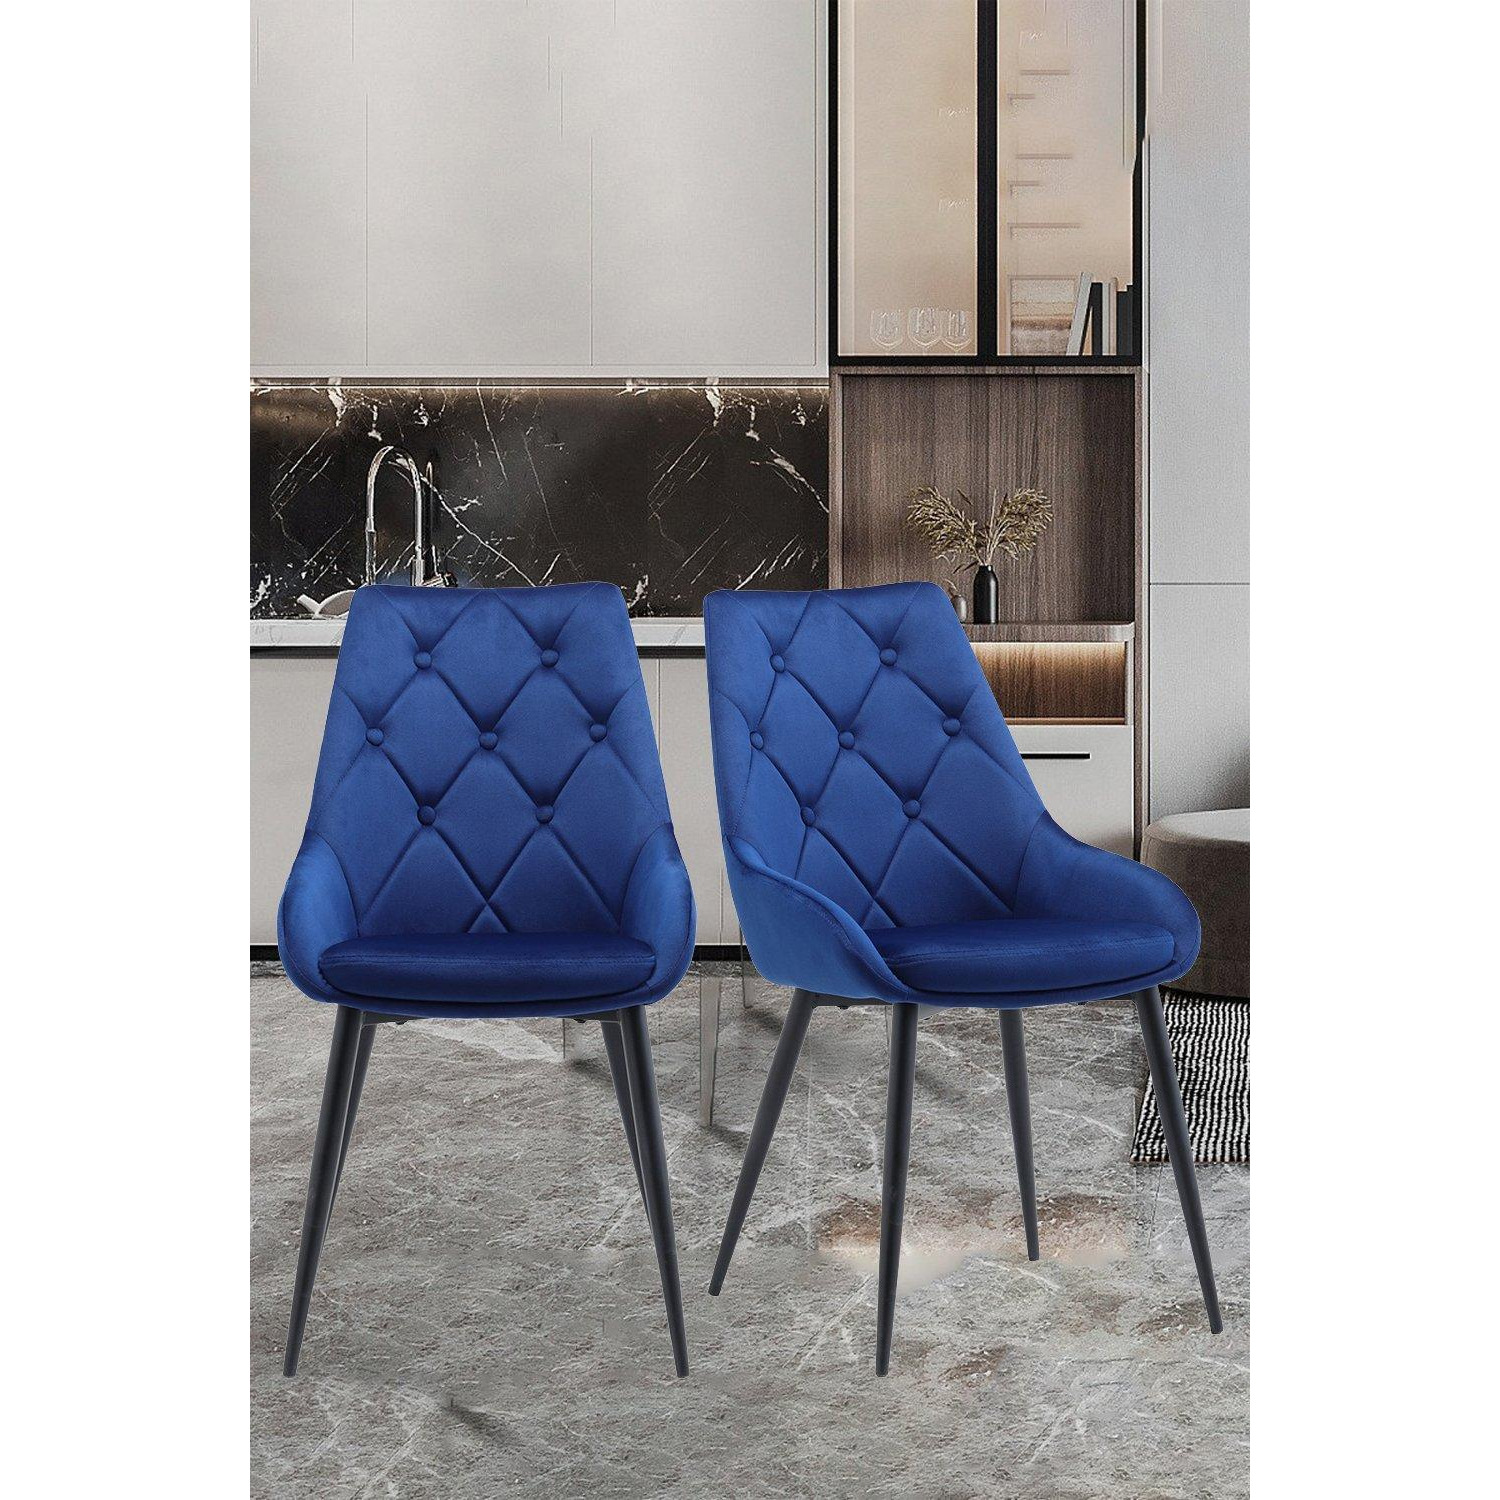 2 pcs Button Velvet Upholstered Dining Chair with Metal Legs - image 1